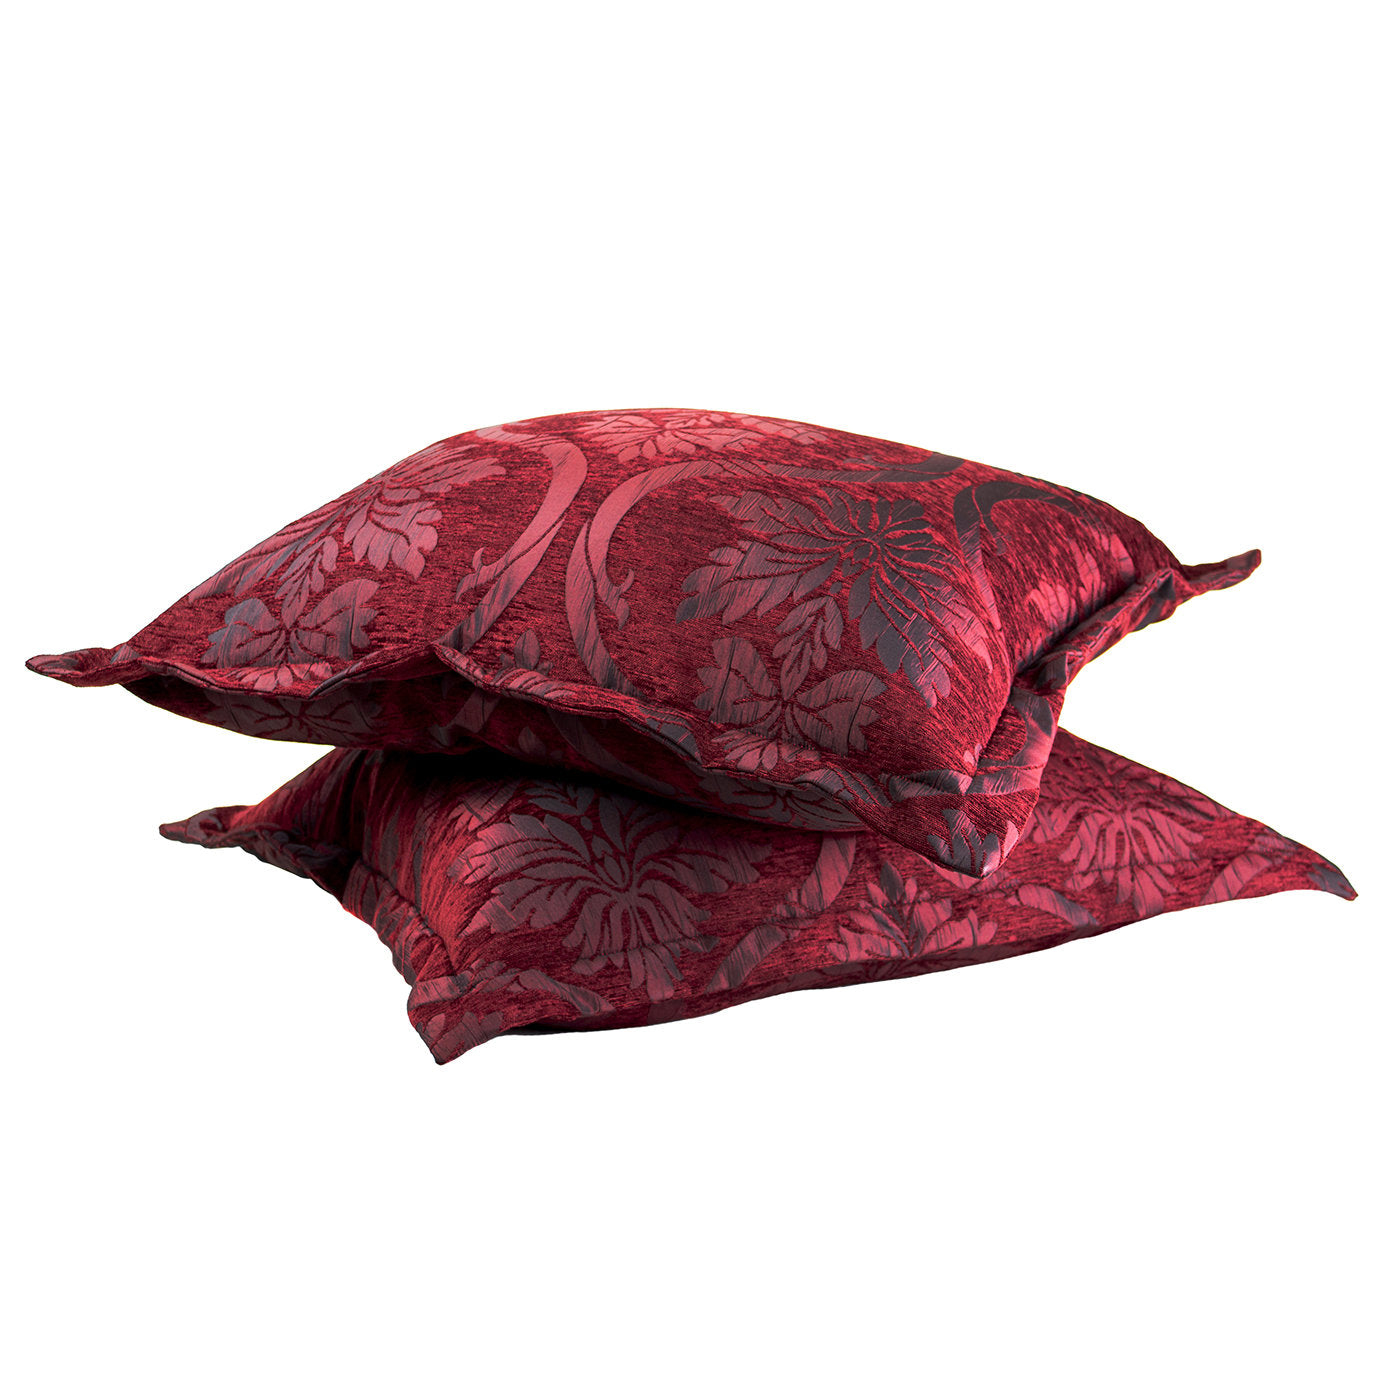 Set of 2 Red Over-sized Throw Cushions  - Alternative view 1